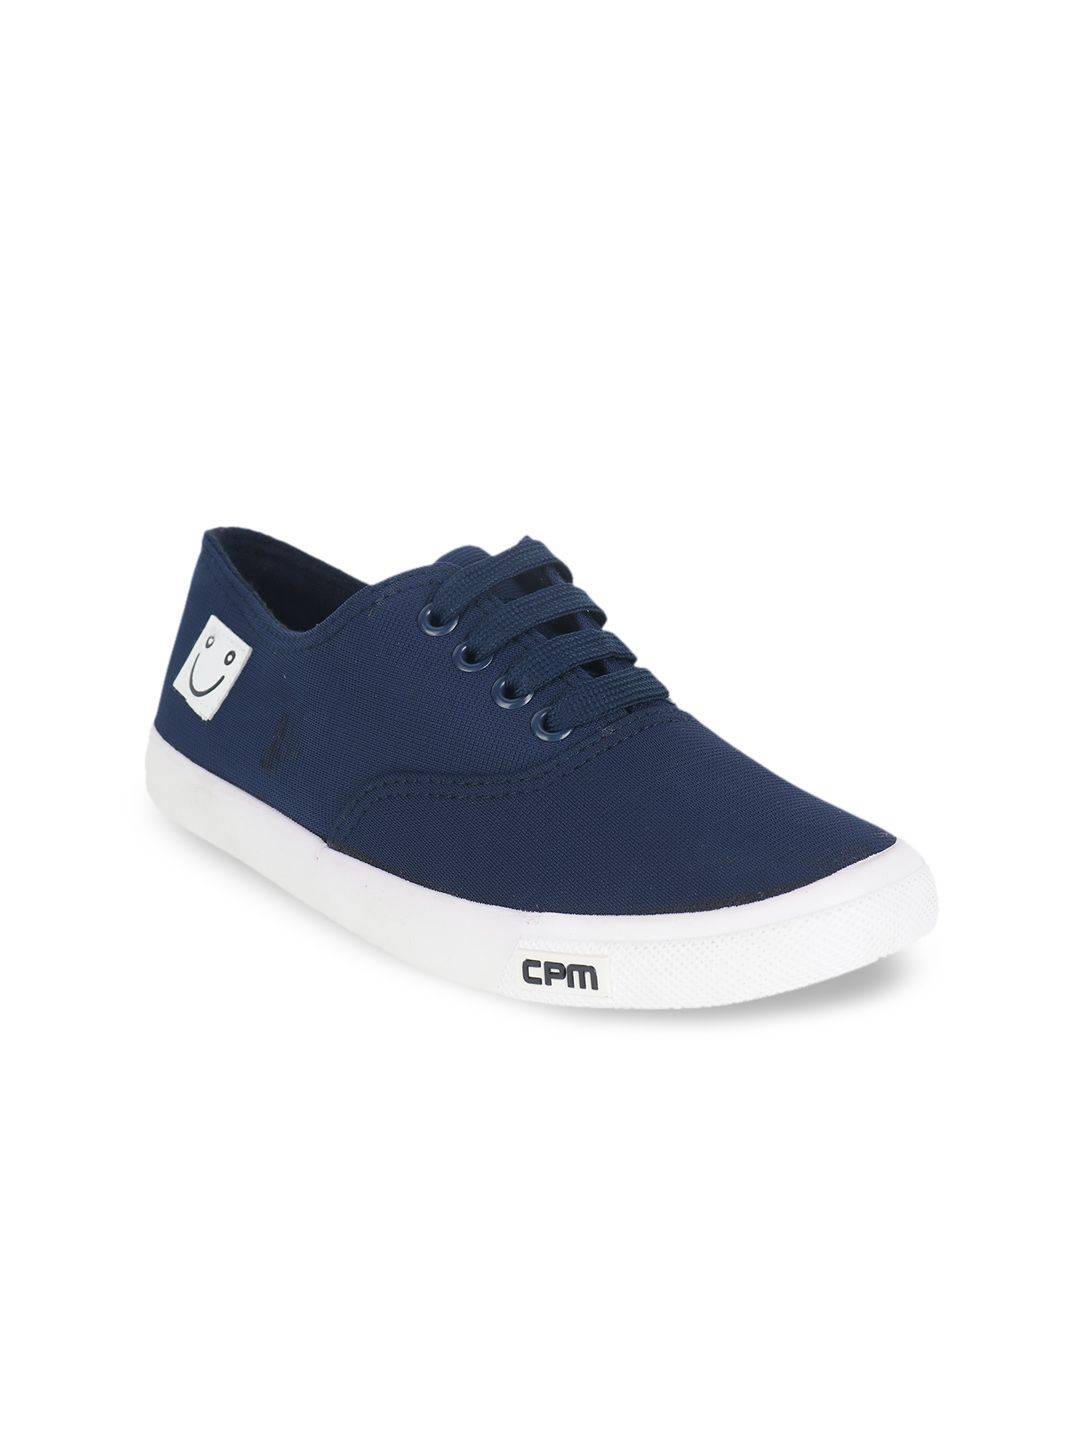 CIPRAMO SPORTS Women Navy Blue Sneakers Price in India